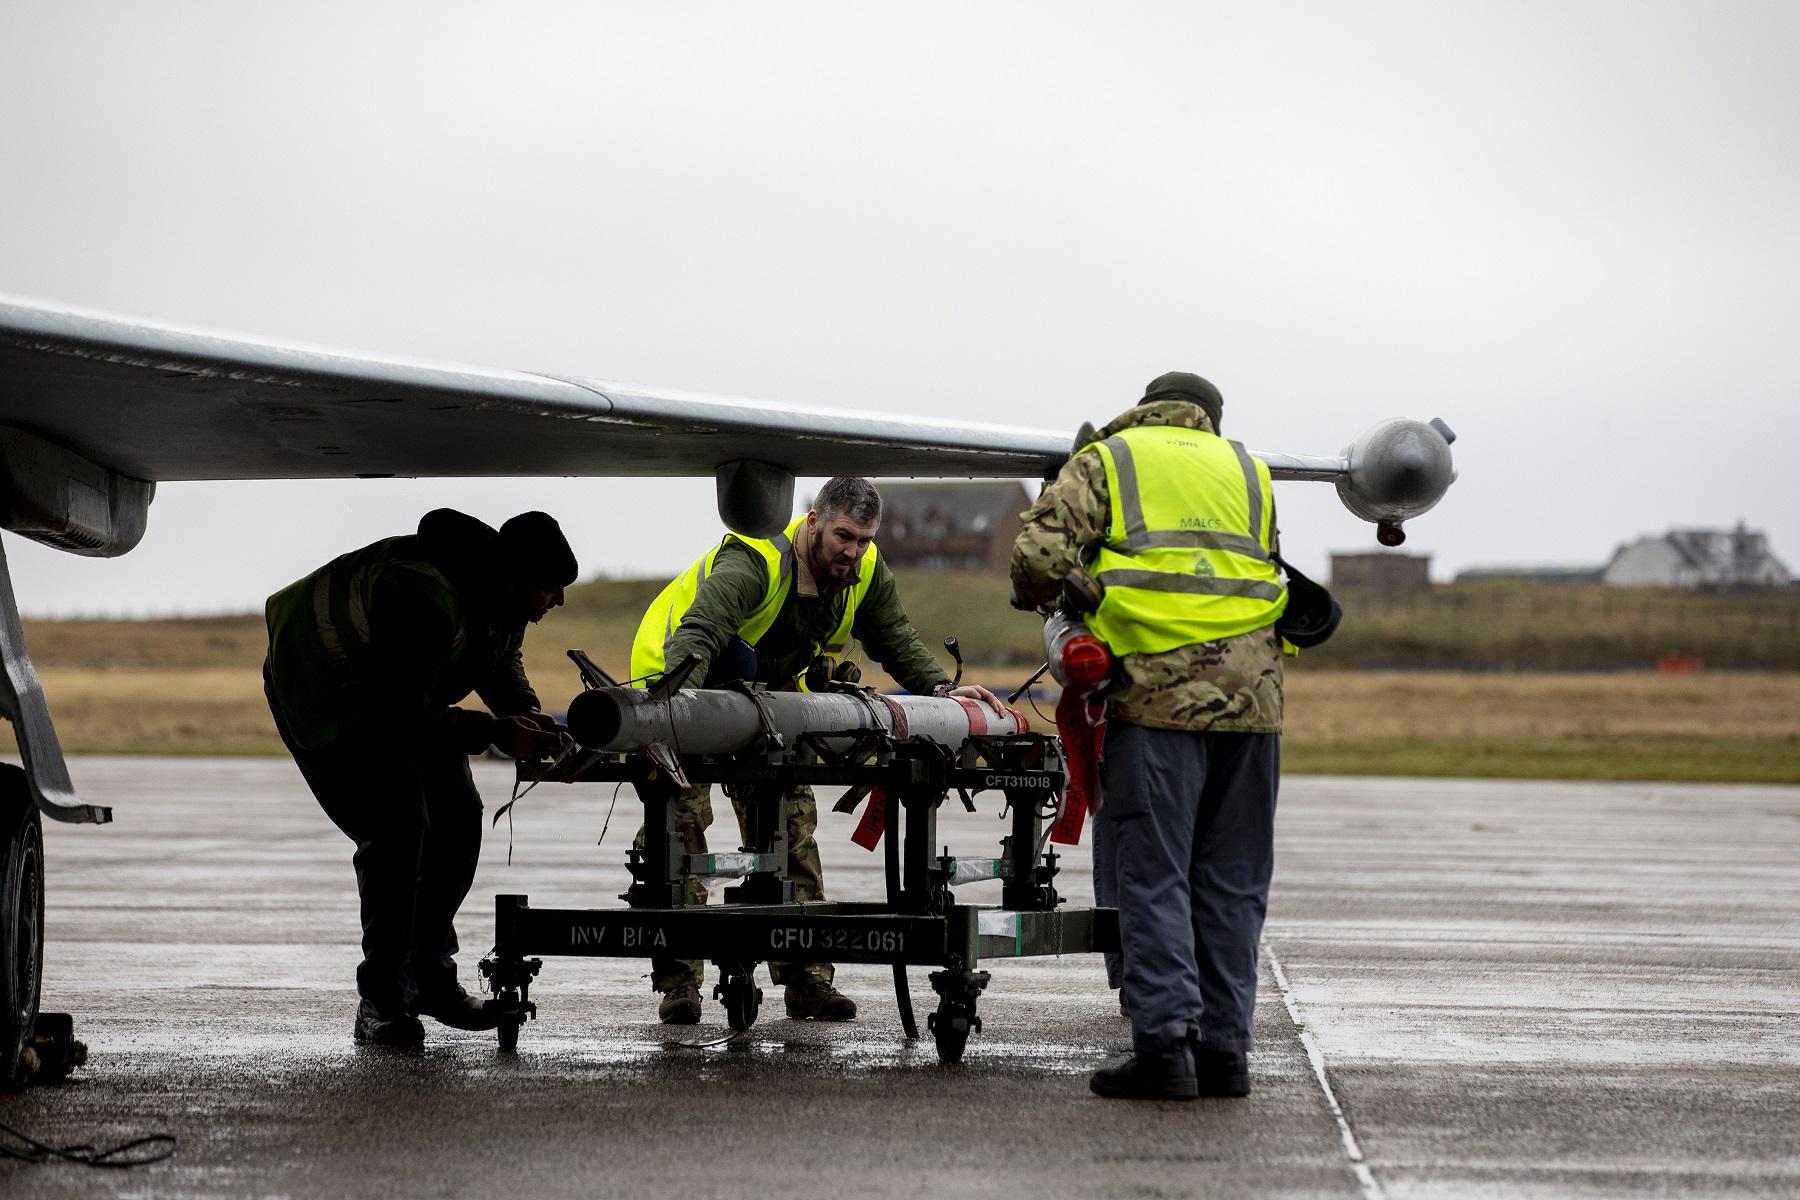 Personnel from Royal Air Force Marham carrying out work on a RAF Eurofighter Typhoon Fighters.